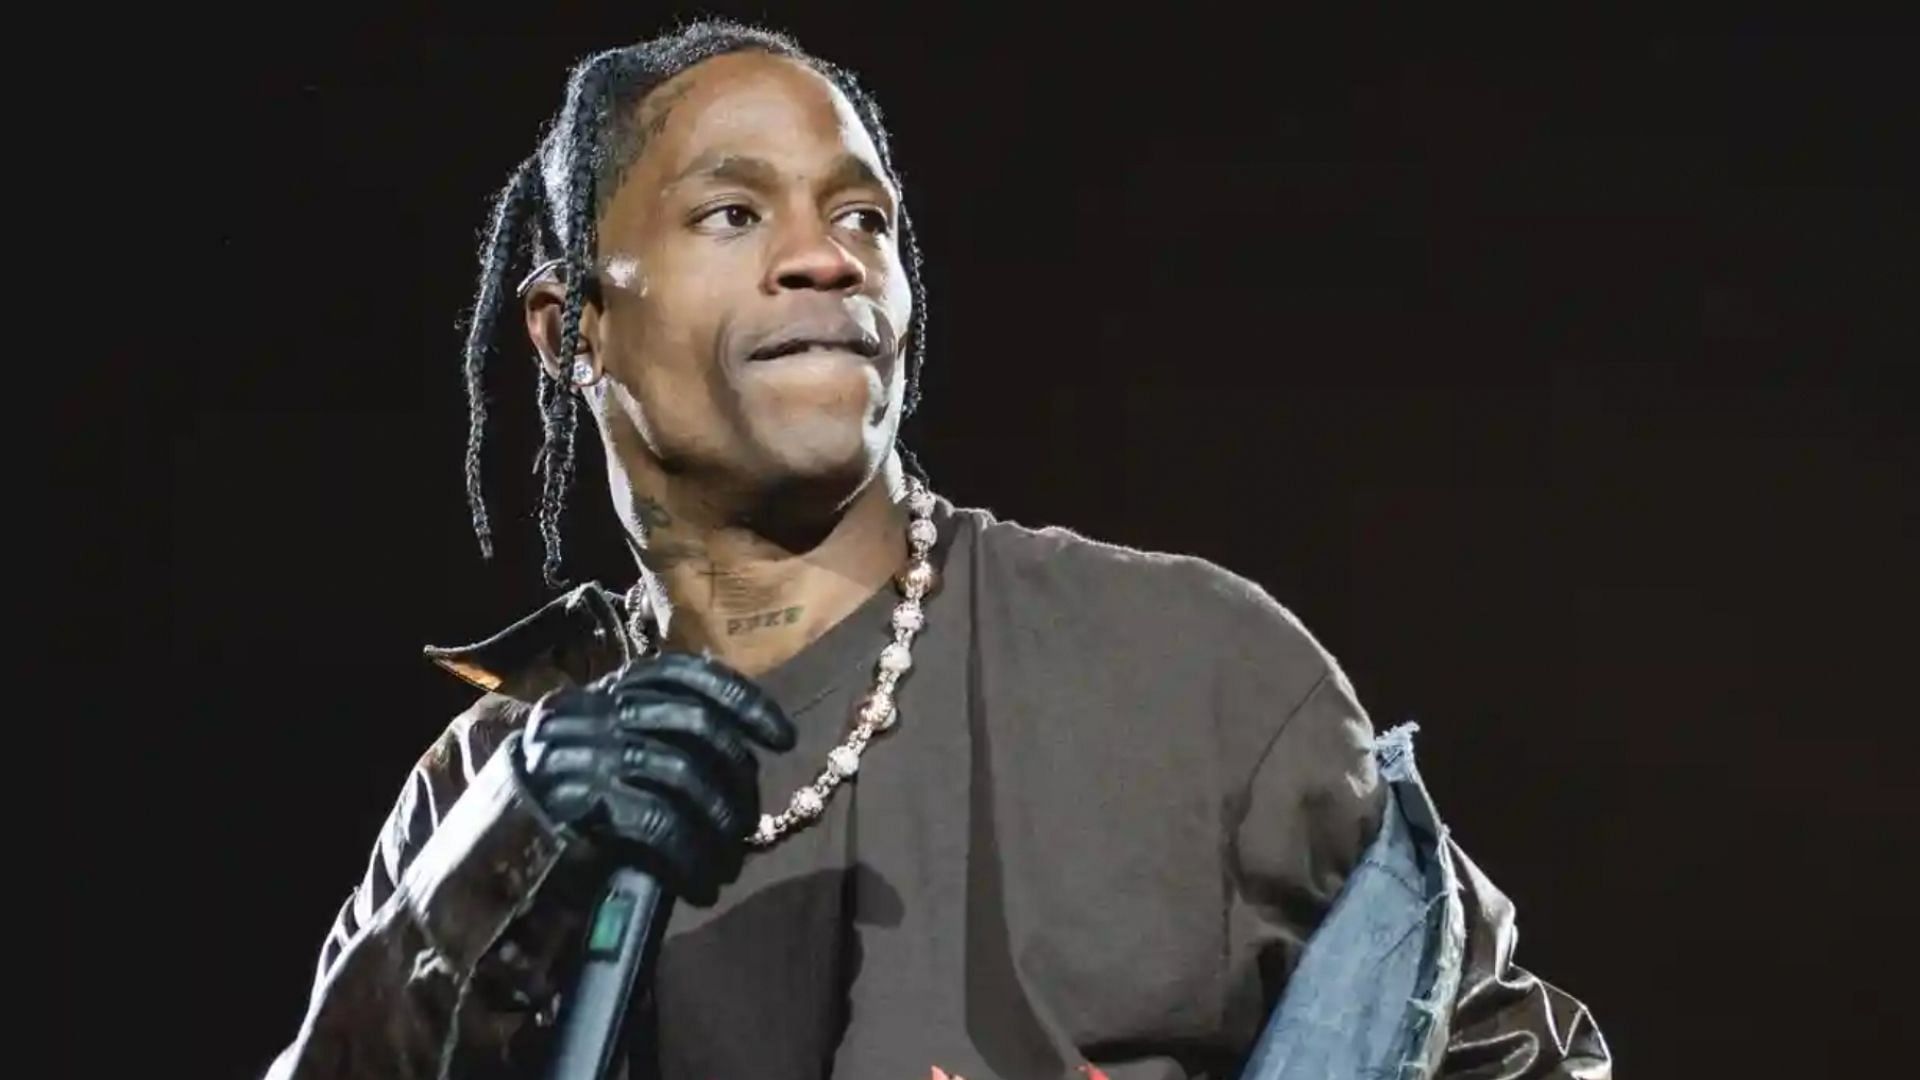 Travis Scott has announced a concert slated for November this year. (Image via AP)